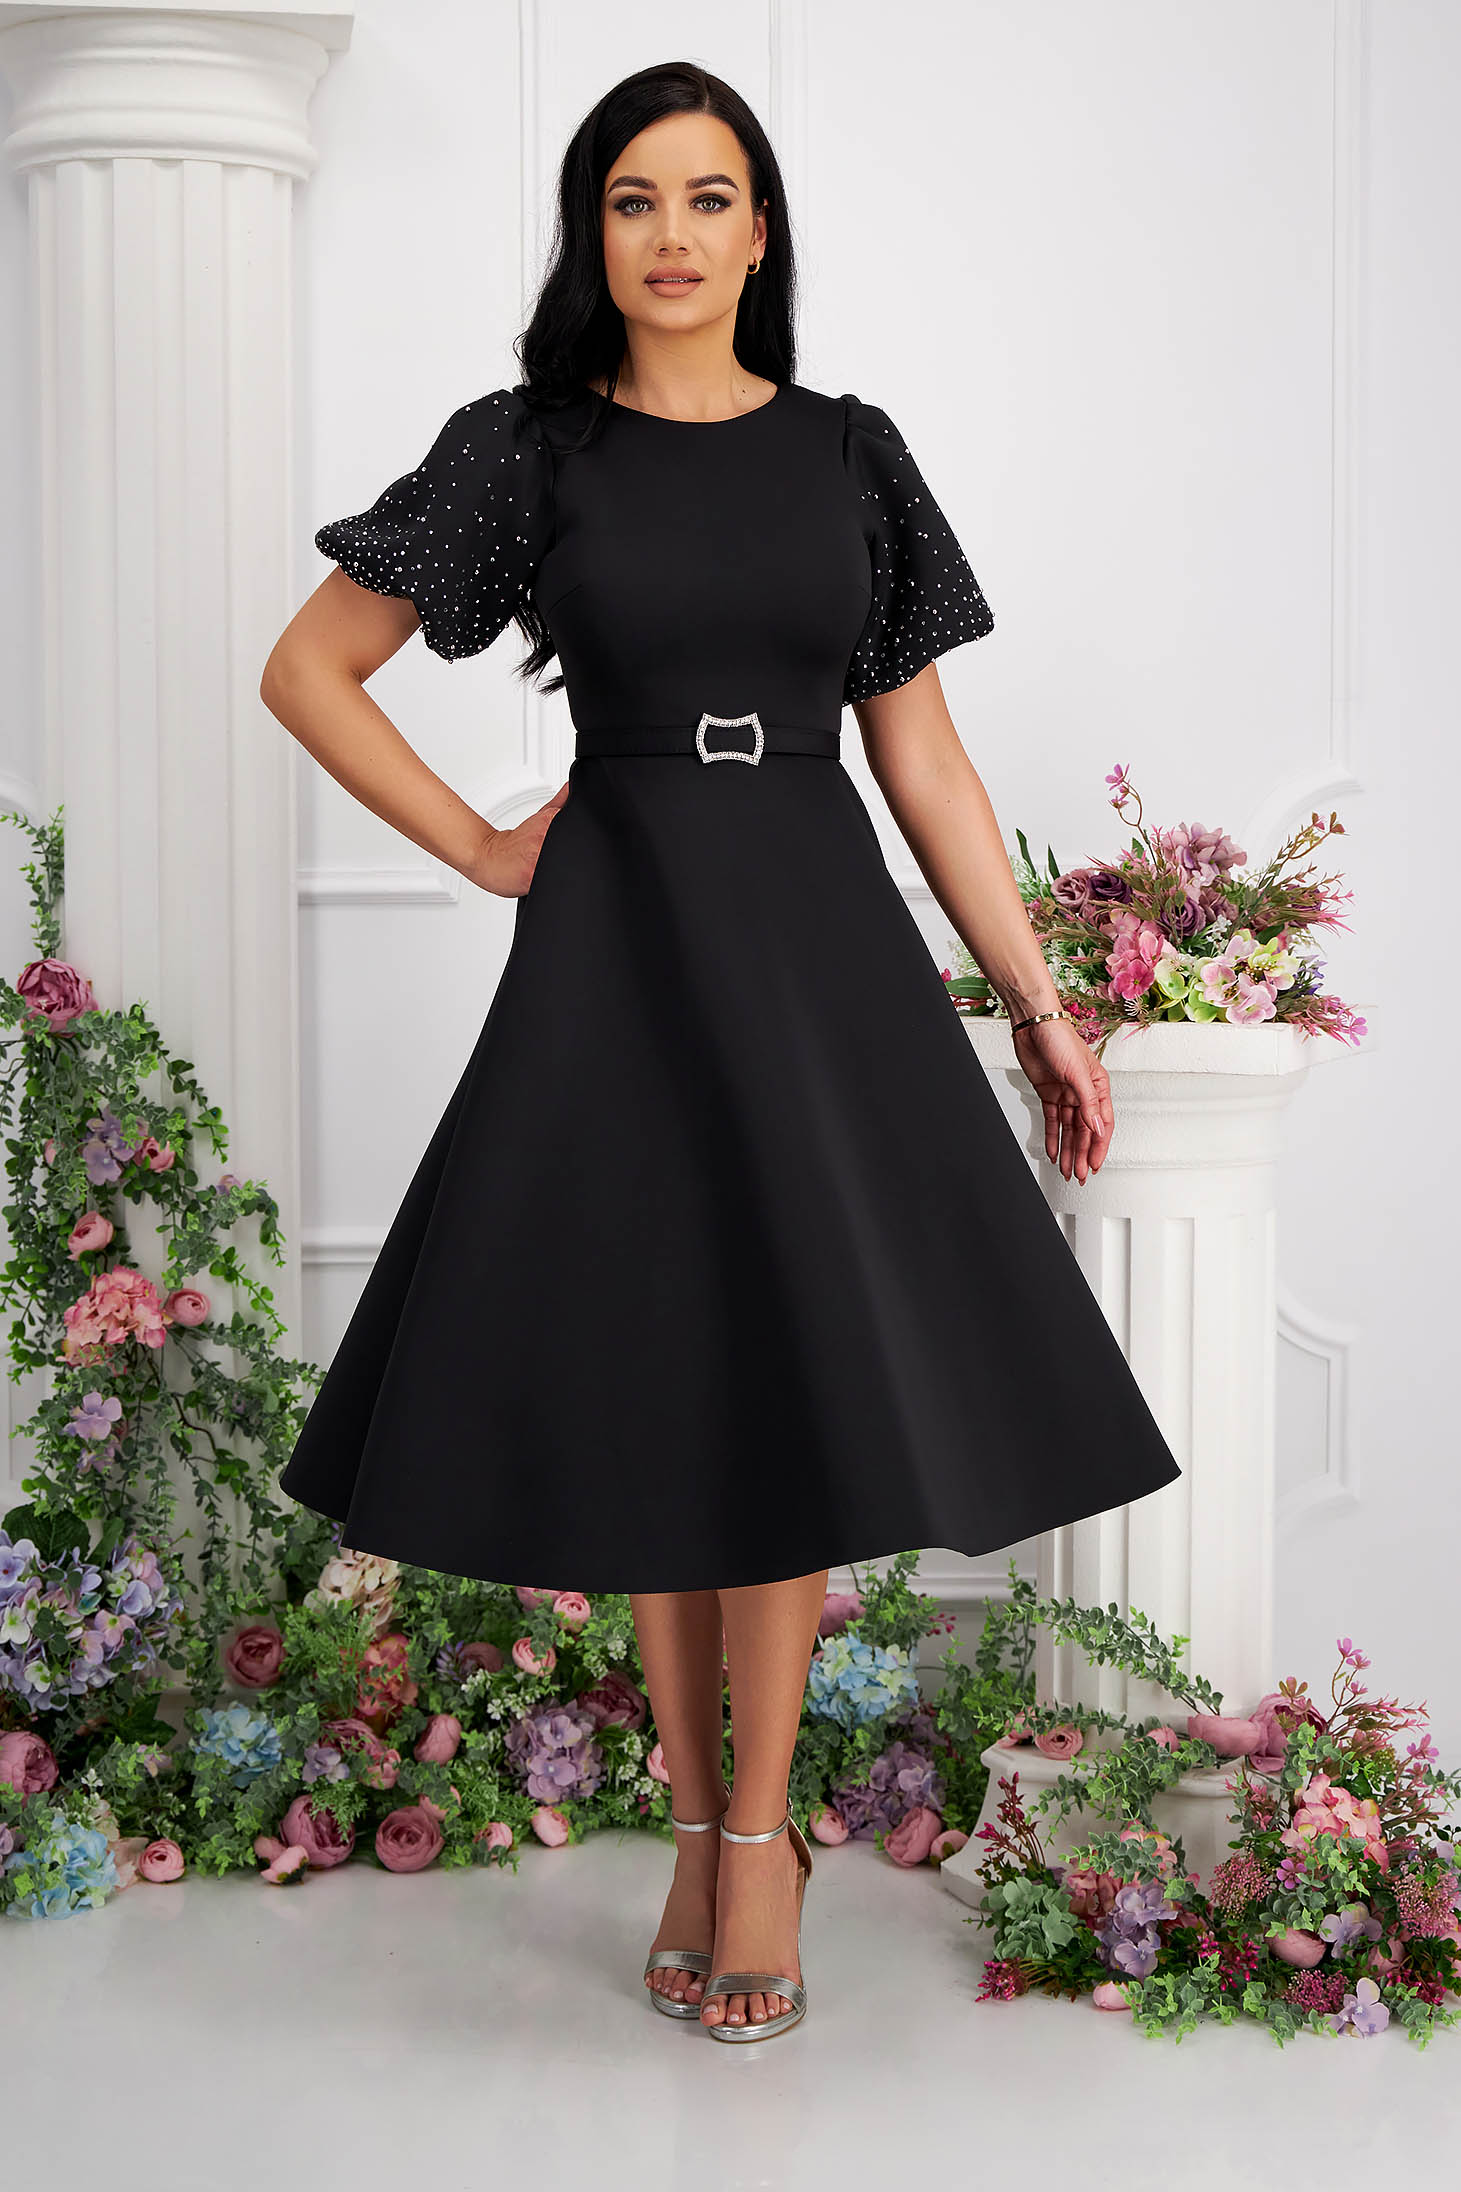 Black neoprene midi skater dress with side pockets and puffed sleeves with rhinestones 1 - StarShinerS.com